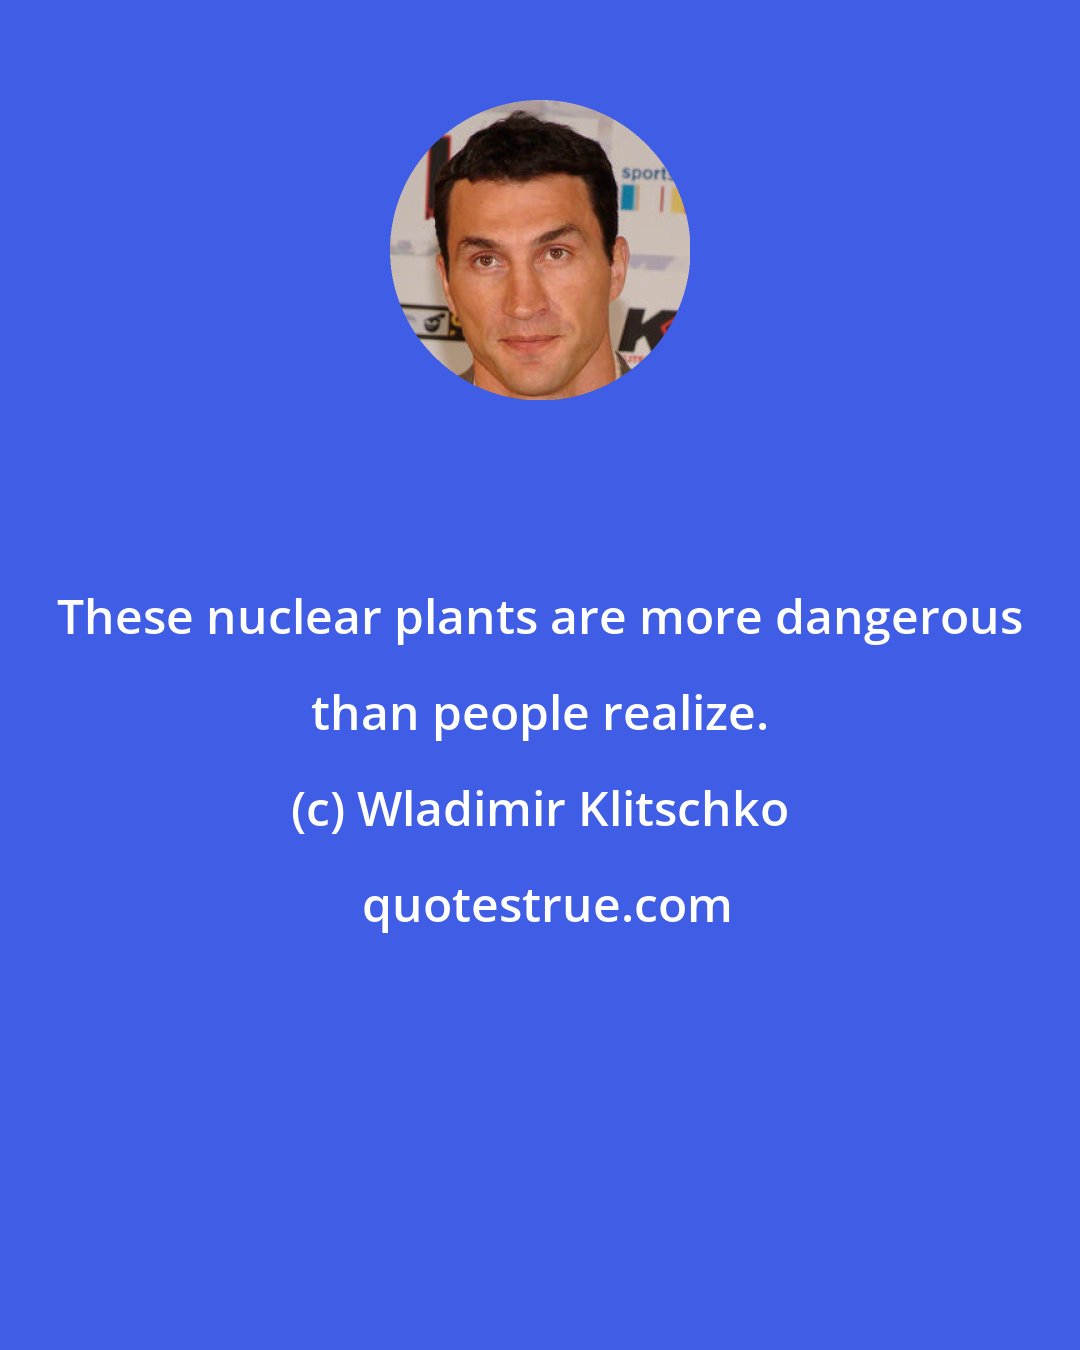 Wladimir Klitschko: These nuclear plants are more dangerous than people realize.